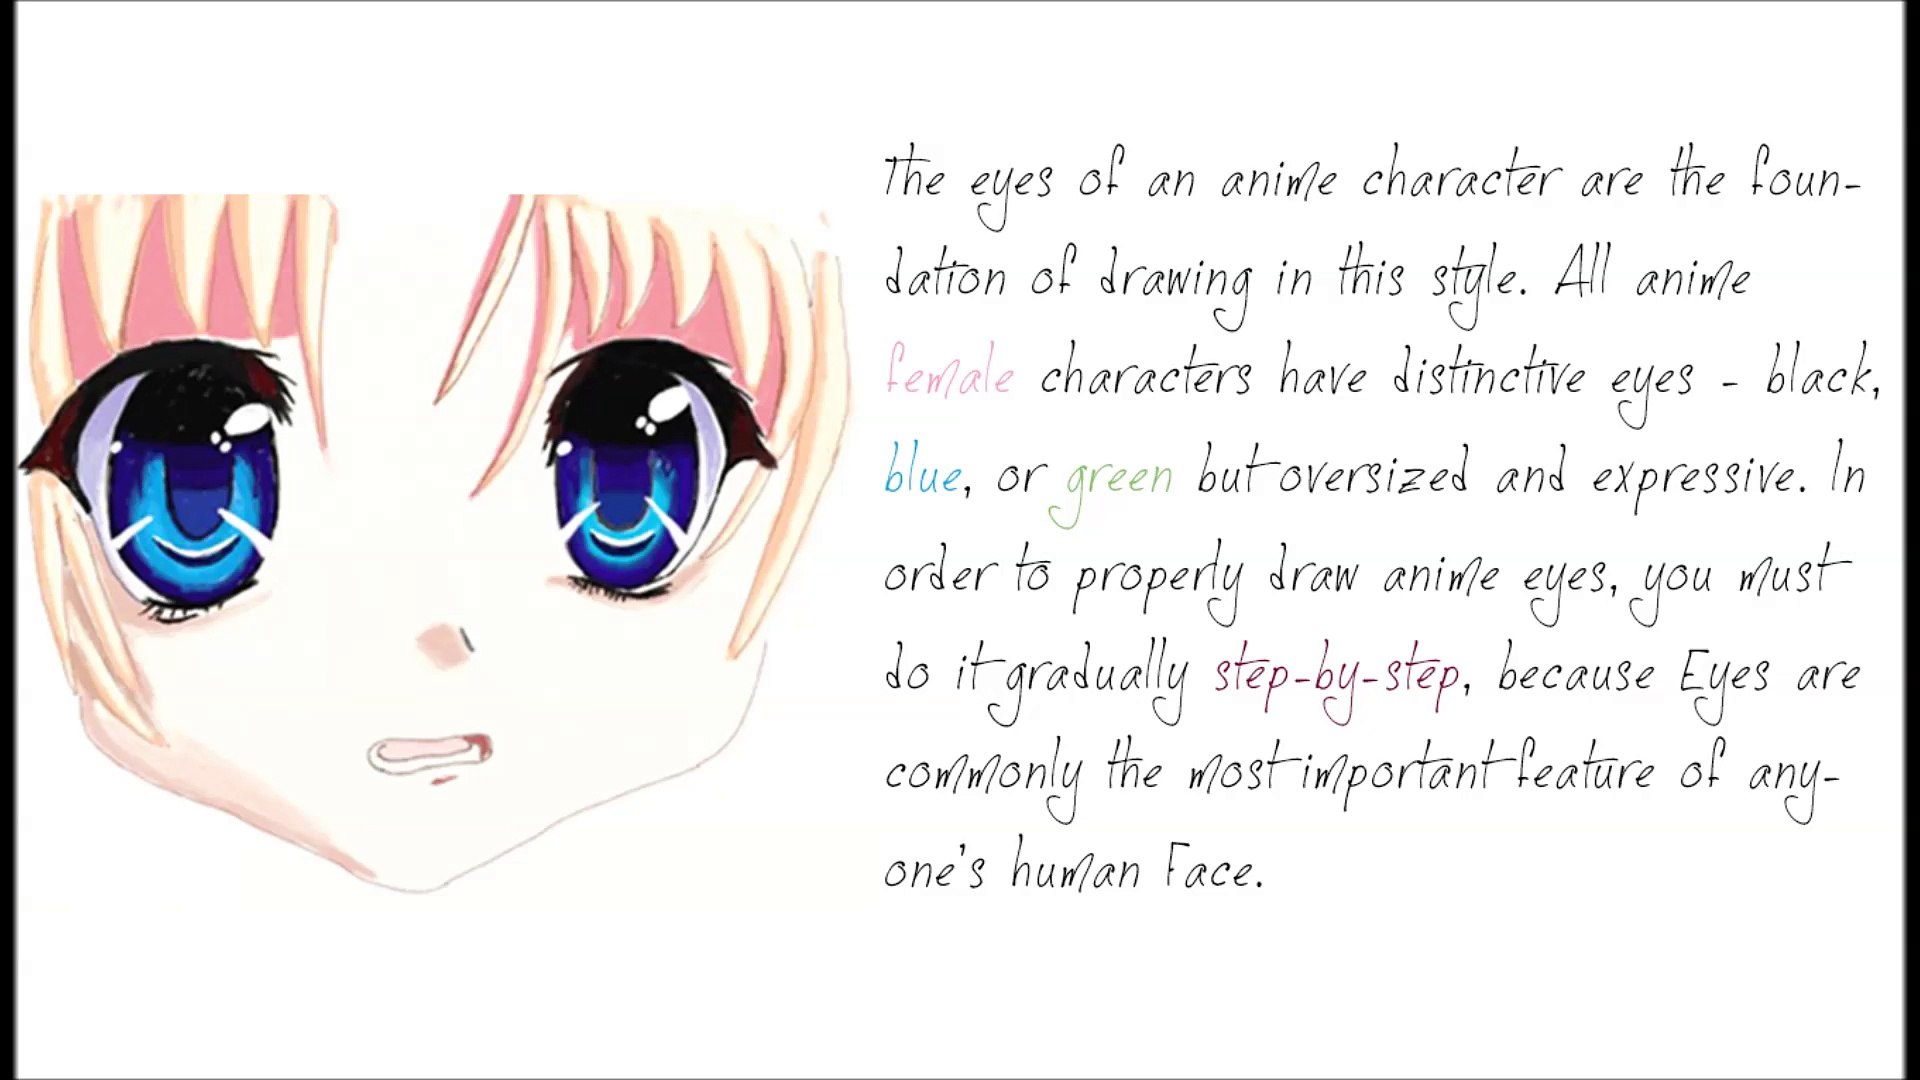 How to Draw Anime Eyes Step-by-Step - Dailymotion Video